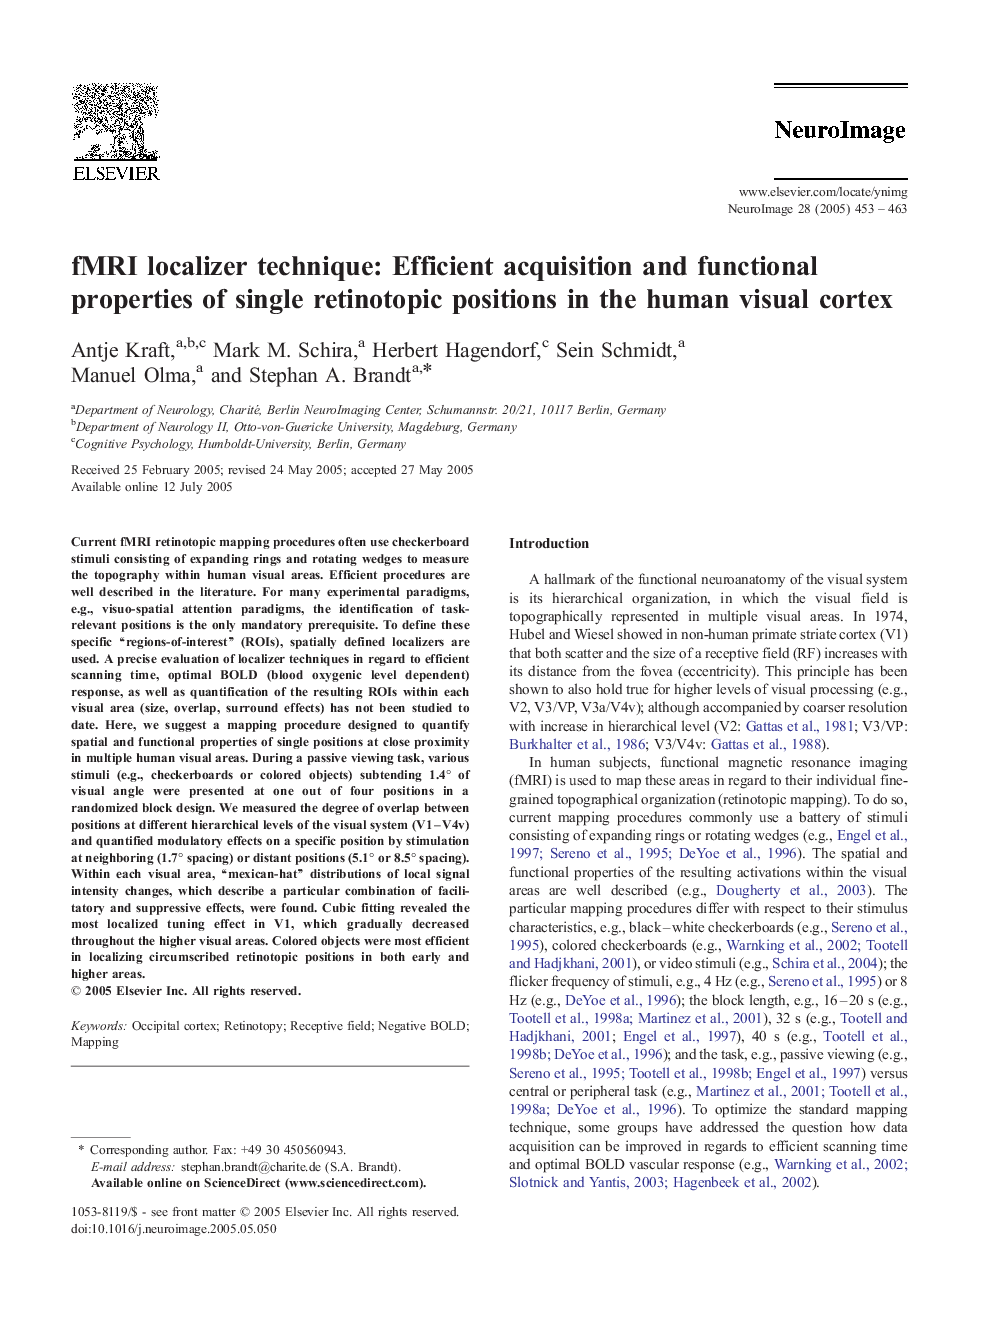 fMRI localizer technique: Efficient acquisition and functional properties of single retinotopic positions in the human visual cortex